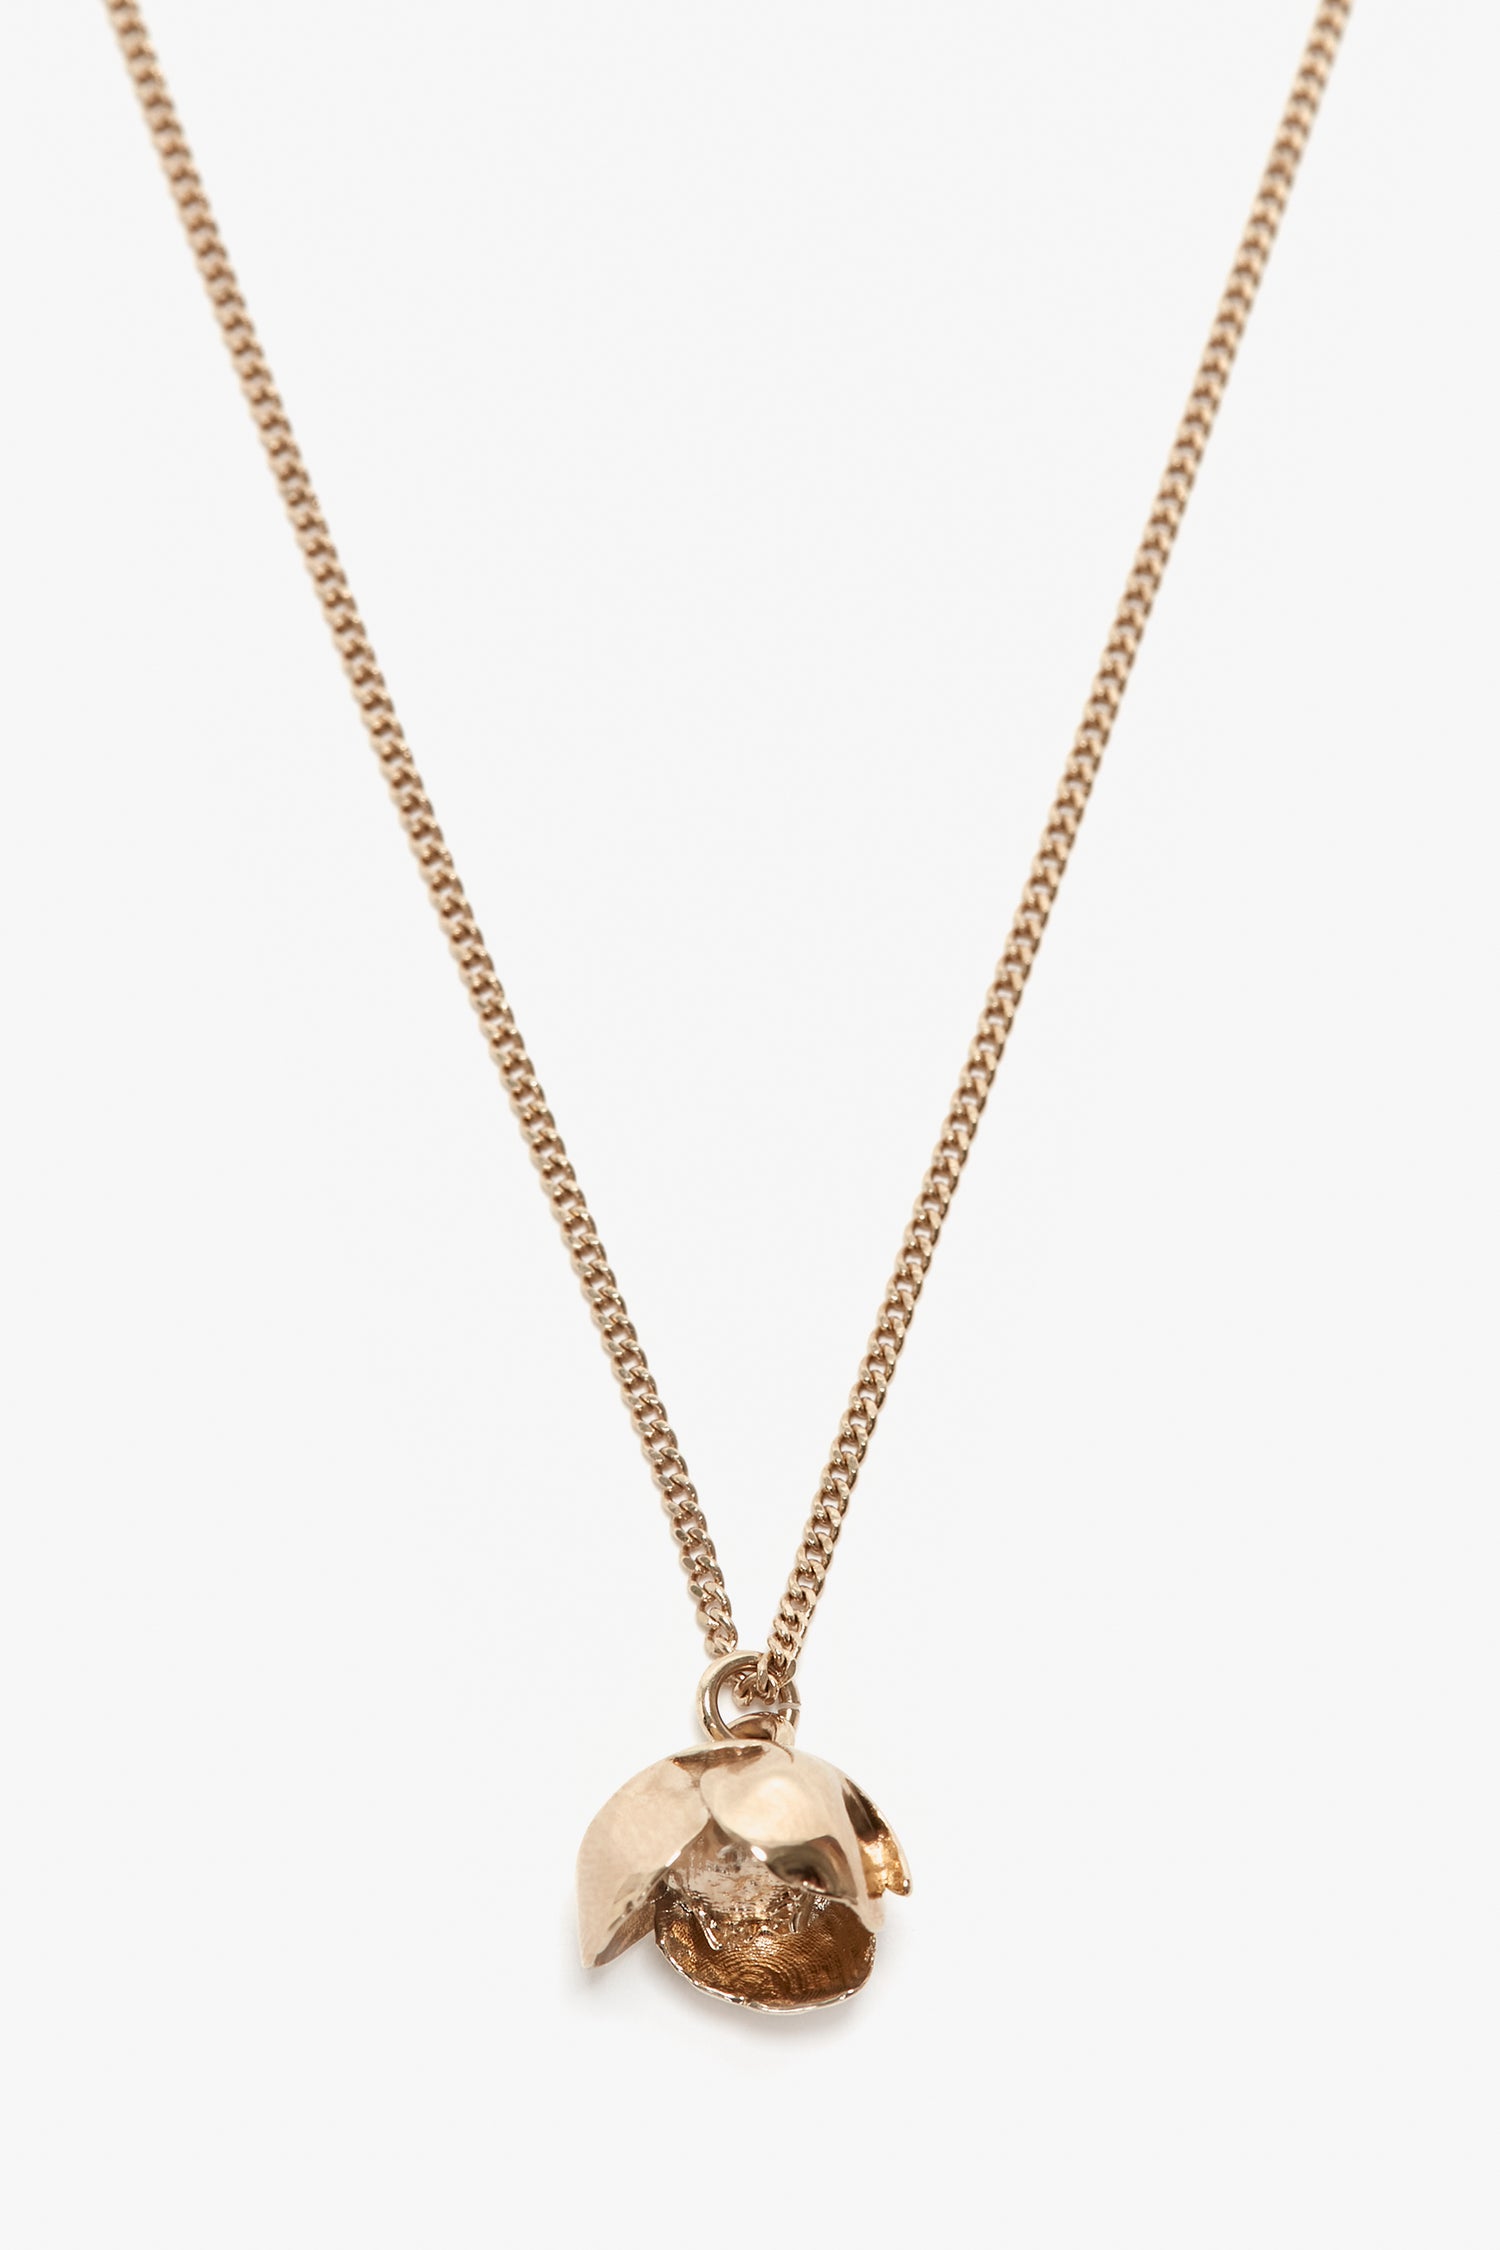 A gold chain necklace with a unique, shell-like pendant reveals a textured, metallic interior, reminiscent of the delicate beauty found in an Exclusive Camellia Flower Necklace In Gold by Victoria Beckham, handcrafted in Italy.